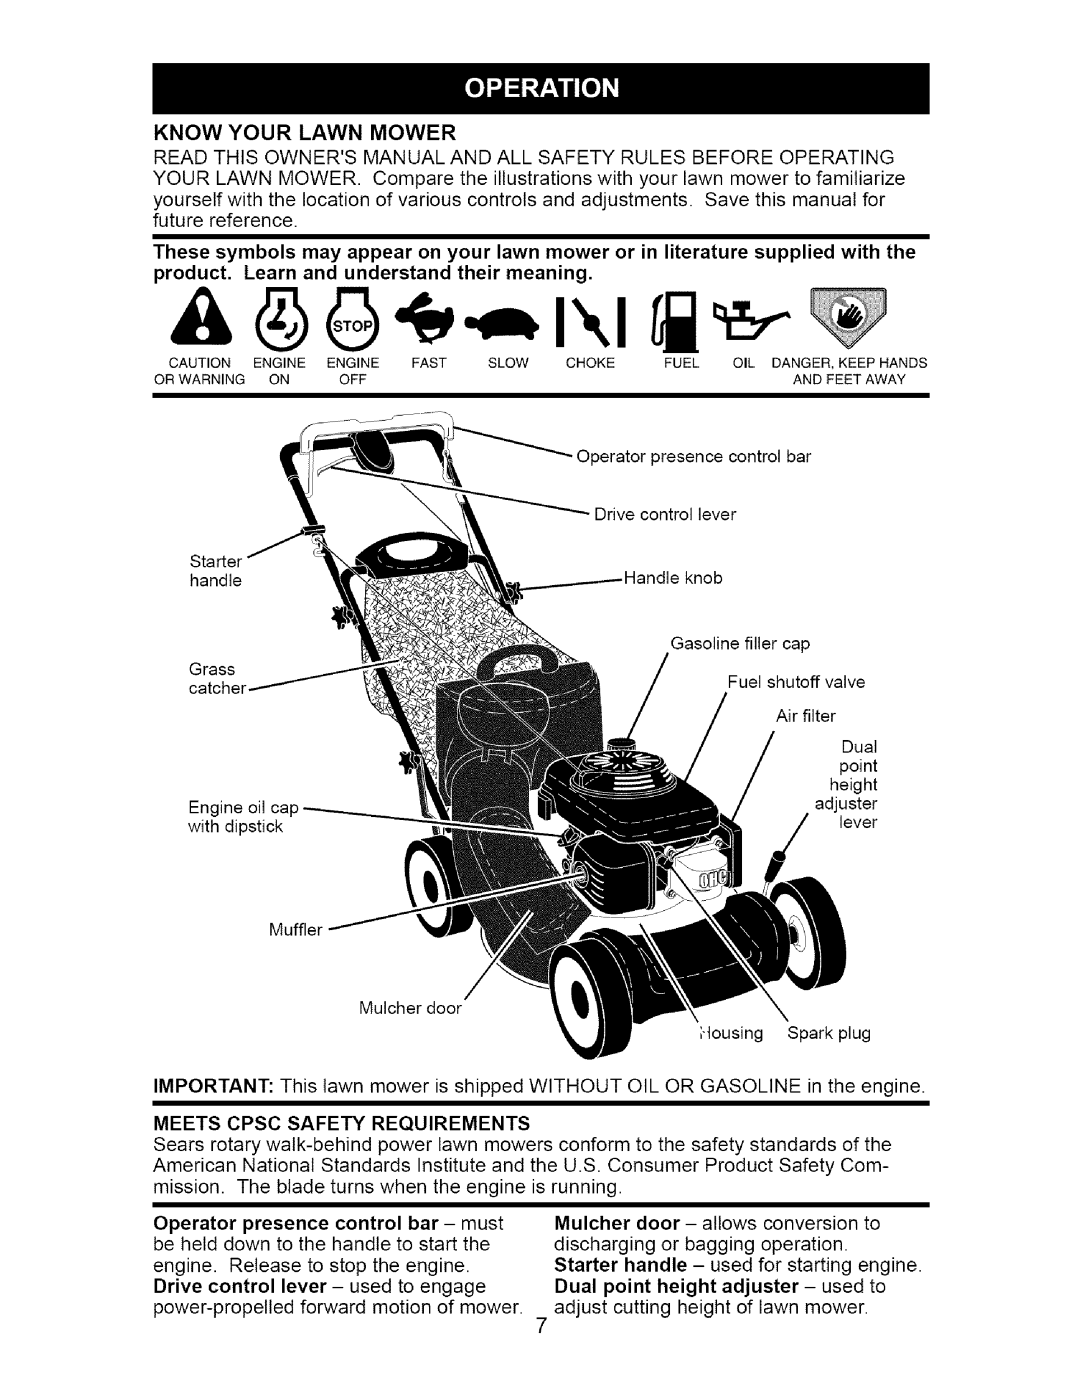 Craftsman 917.37181 Know Your Lawn Mower, product. Learn and understand their meaning, Meets Cpsc Safety Requirements 